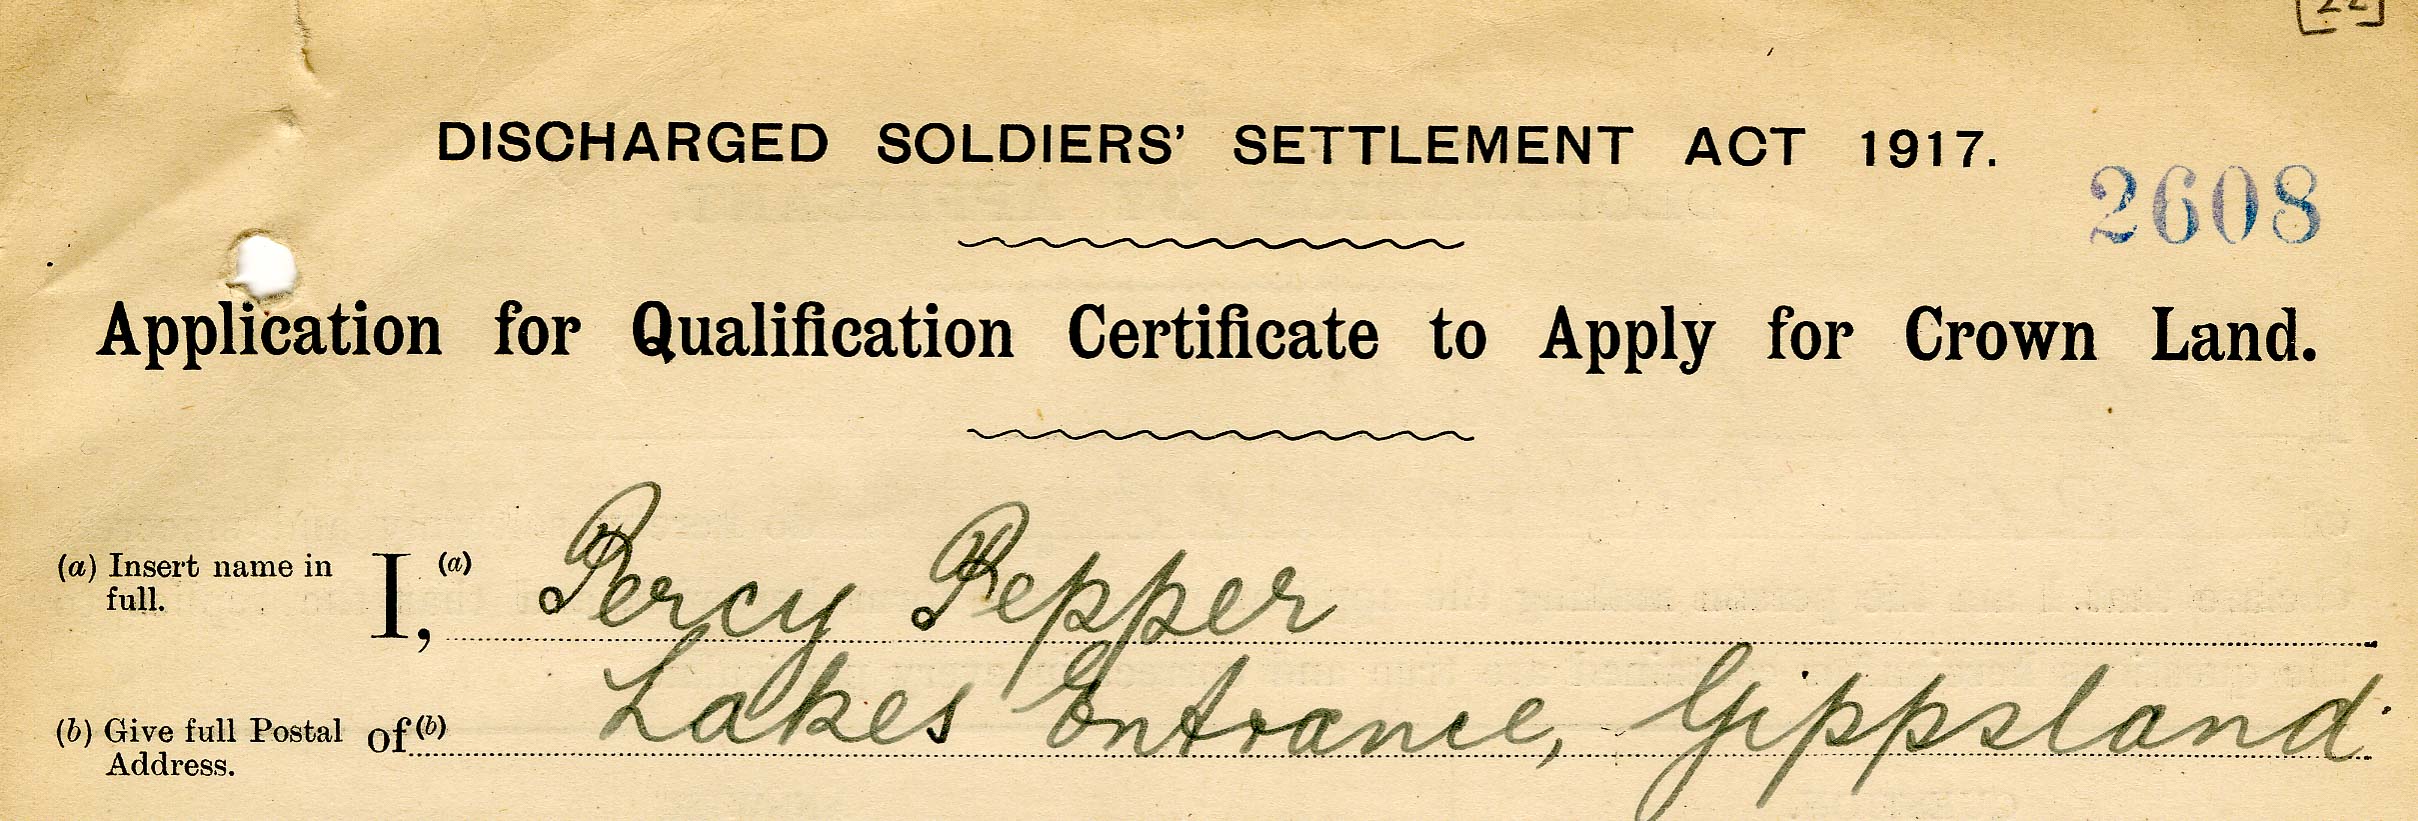 An image of a historical soldier settlement document